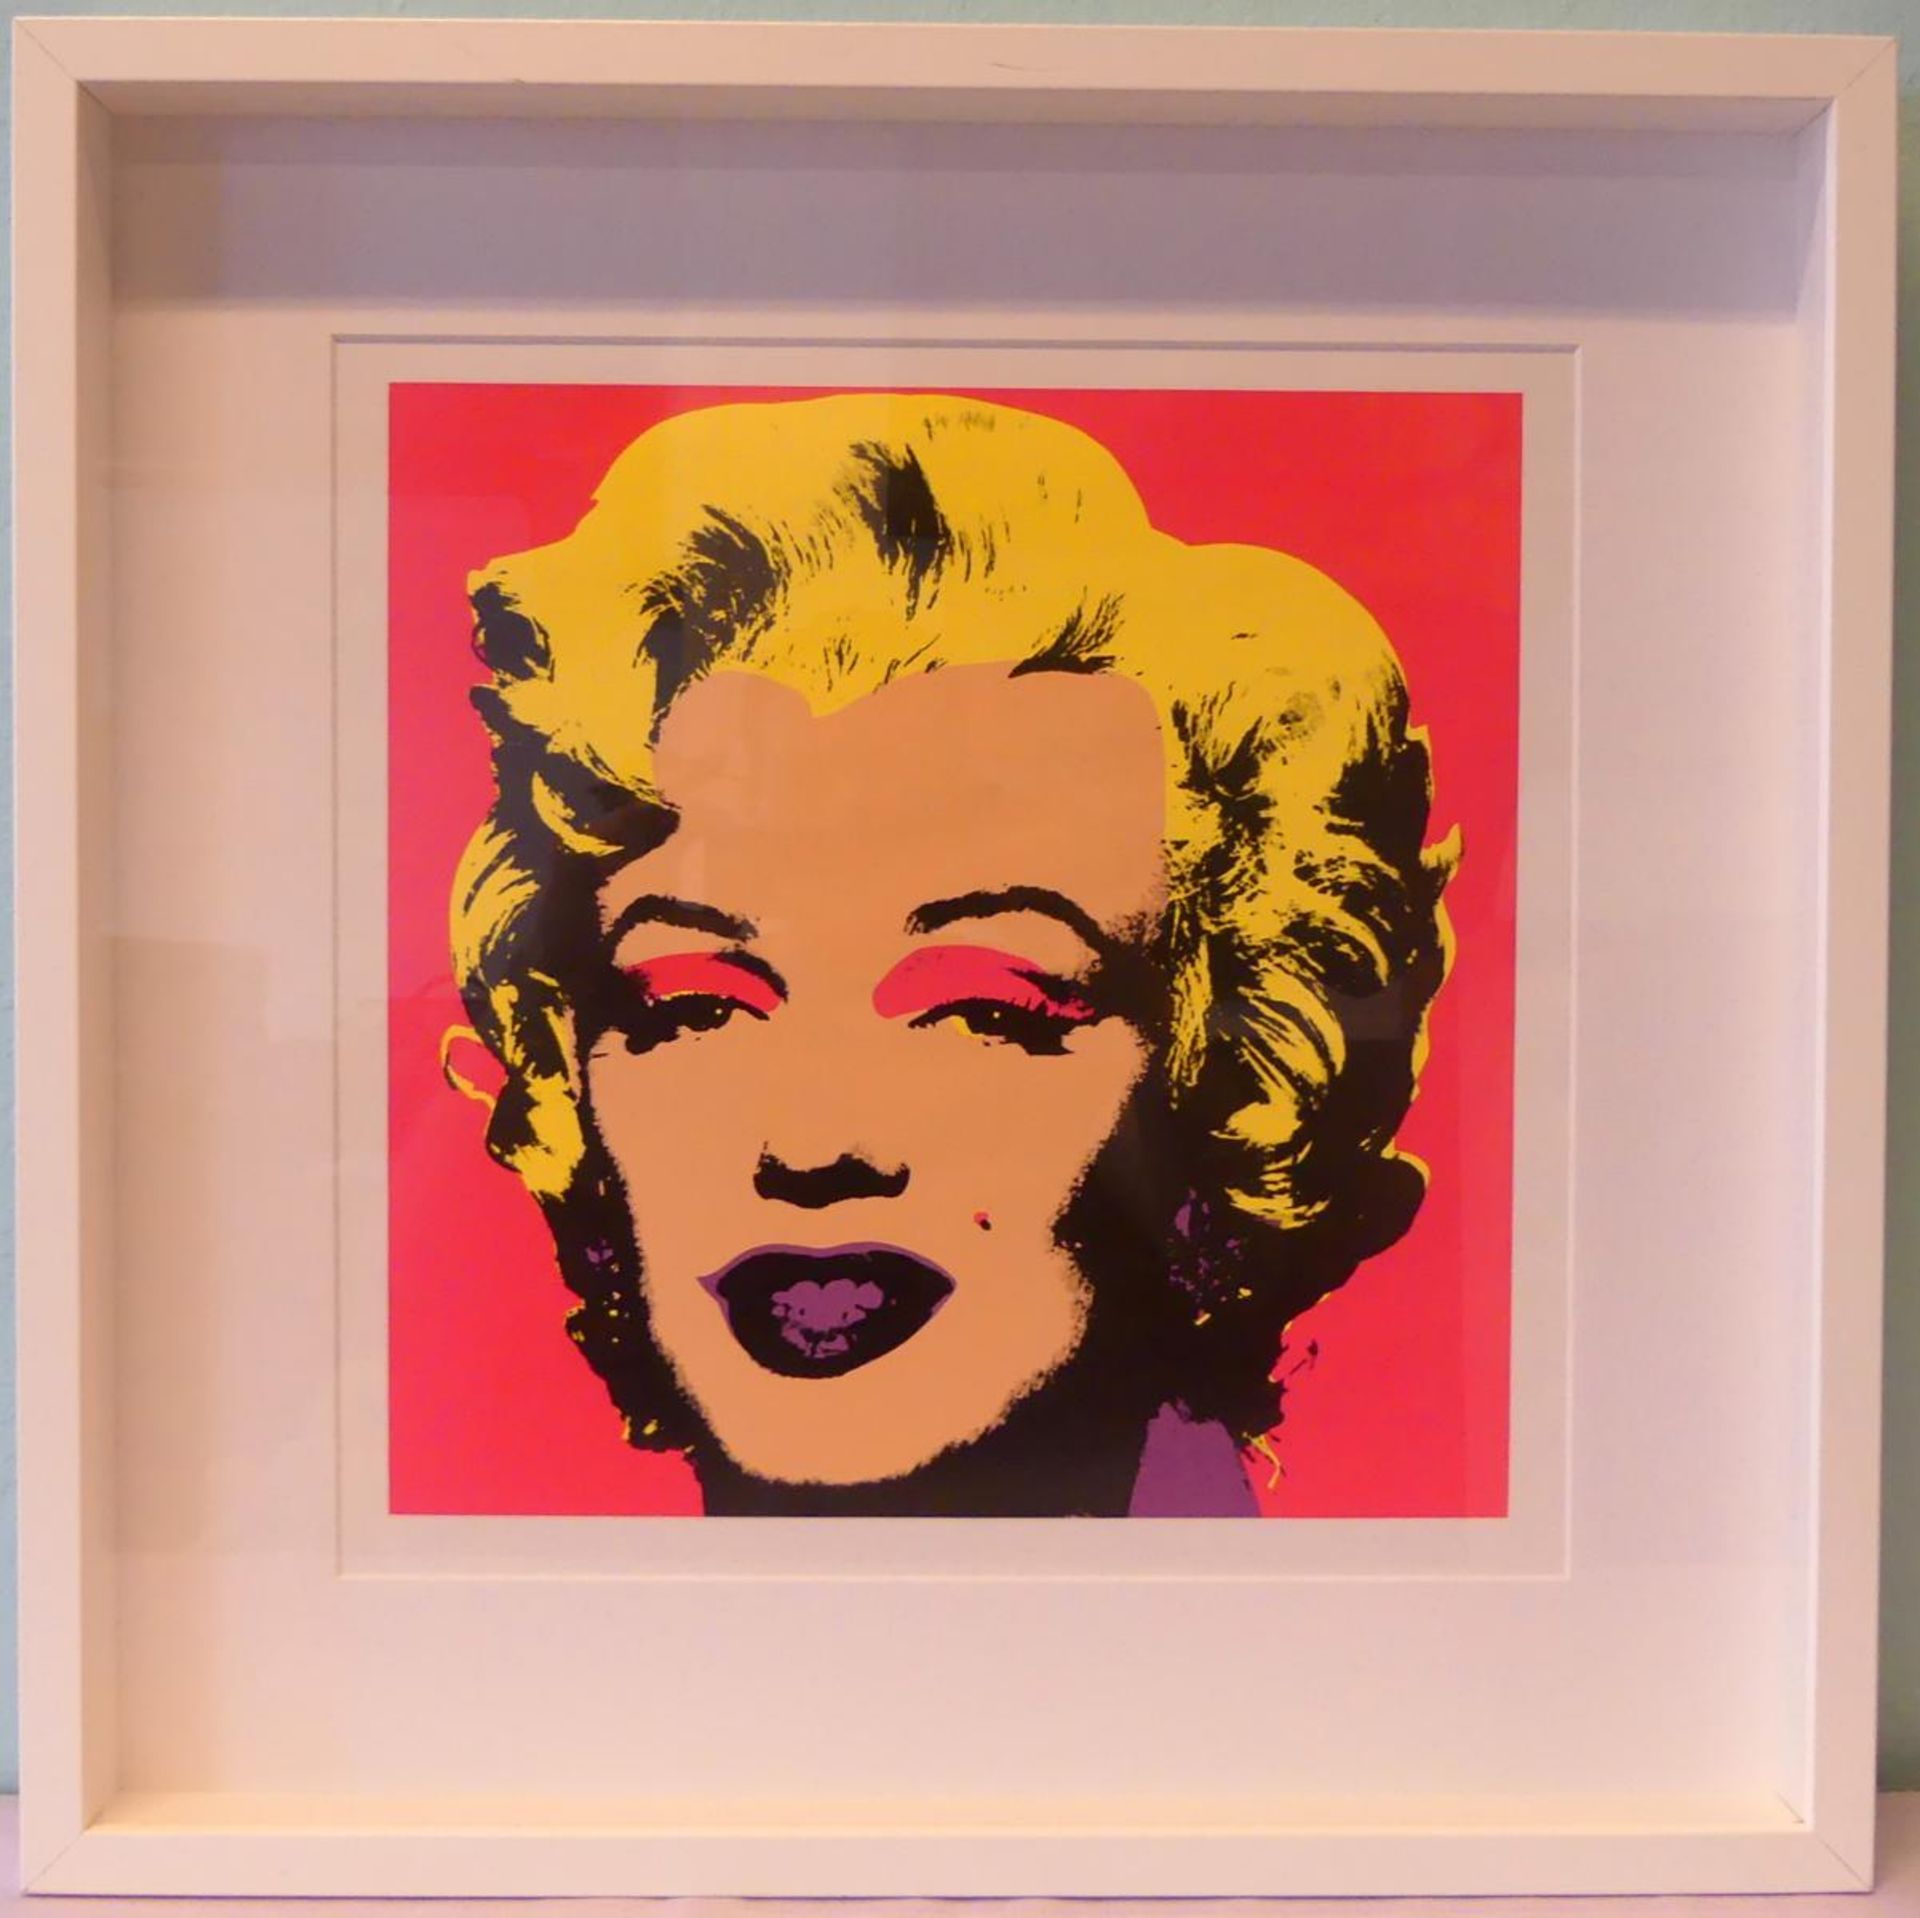 ANDY WARHOL (1928-1987), "Marilyn Monroe", Farboffsetlithographie